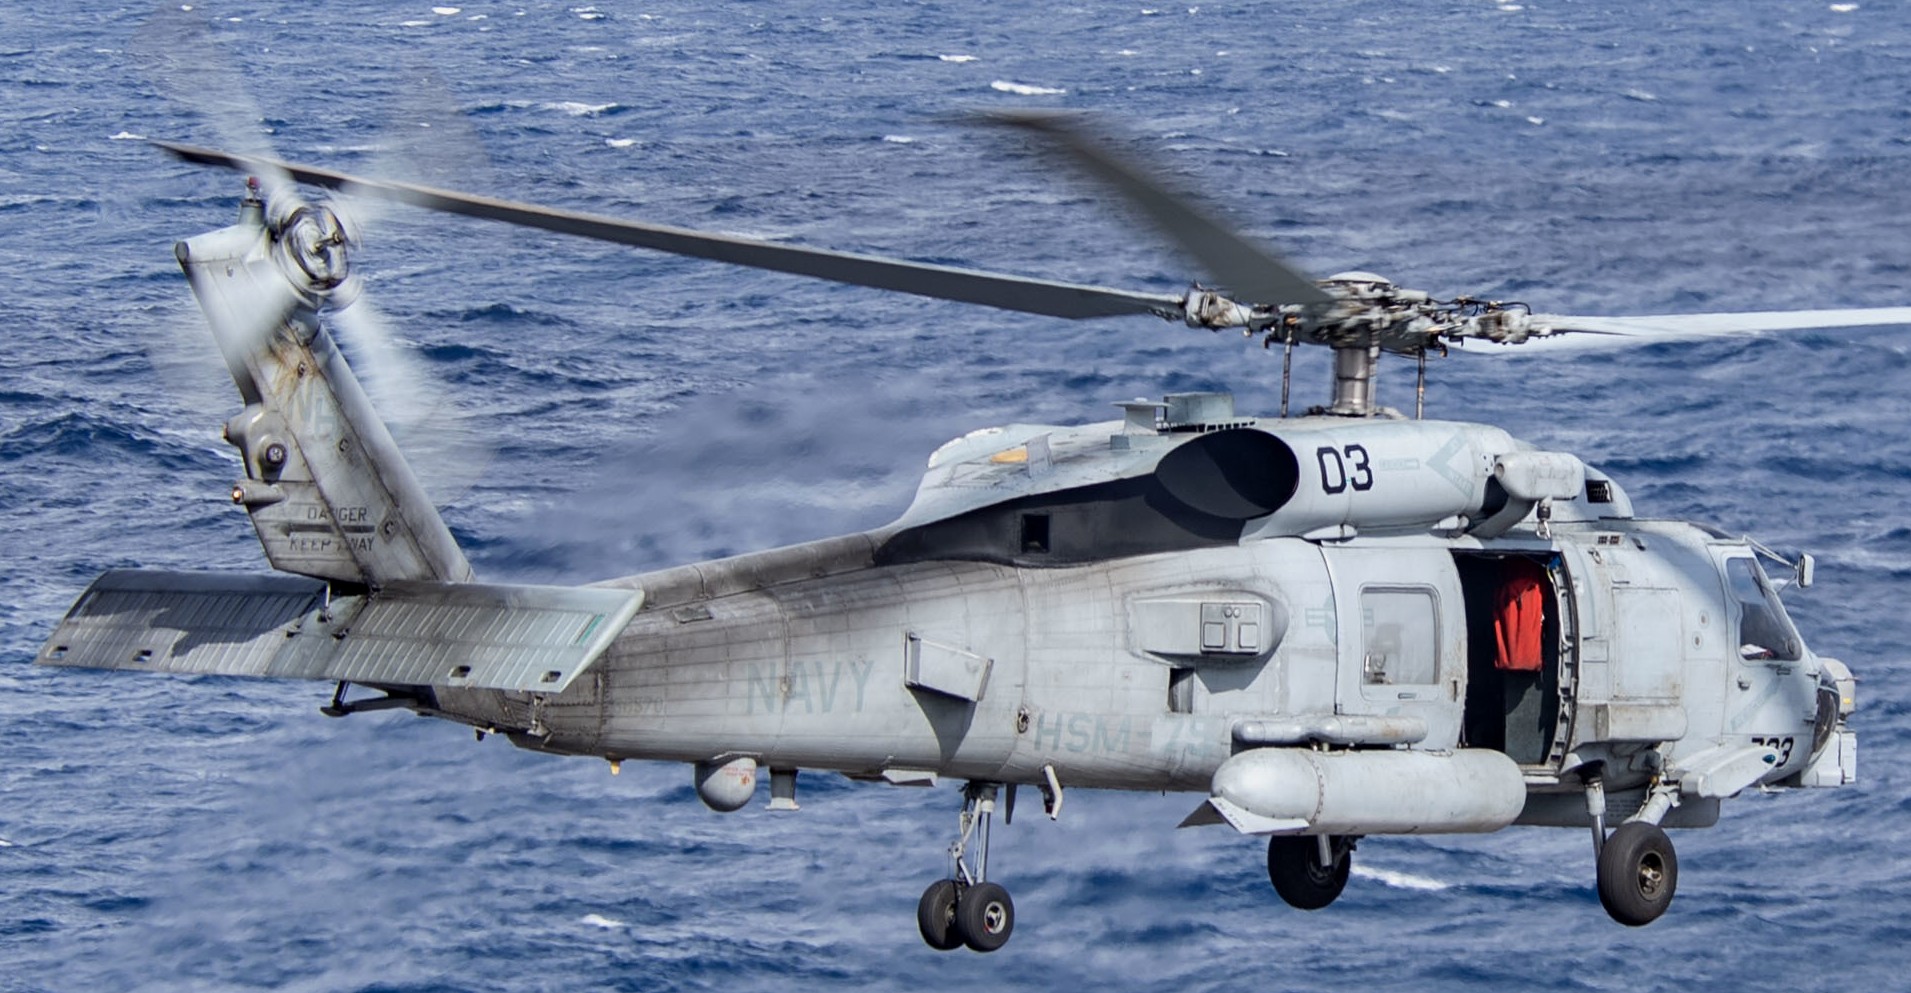 hsm-75 wolf pack helicopter maritime strike squadron mh-60r seahawk cvw-11 cvn-71 uss theodore roosevelt 89